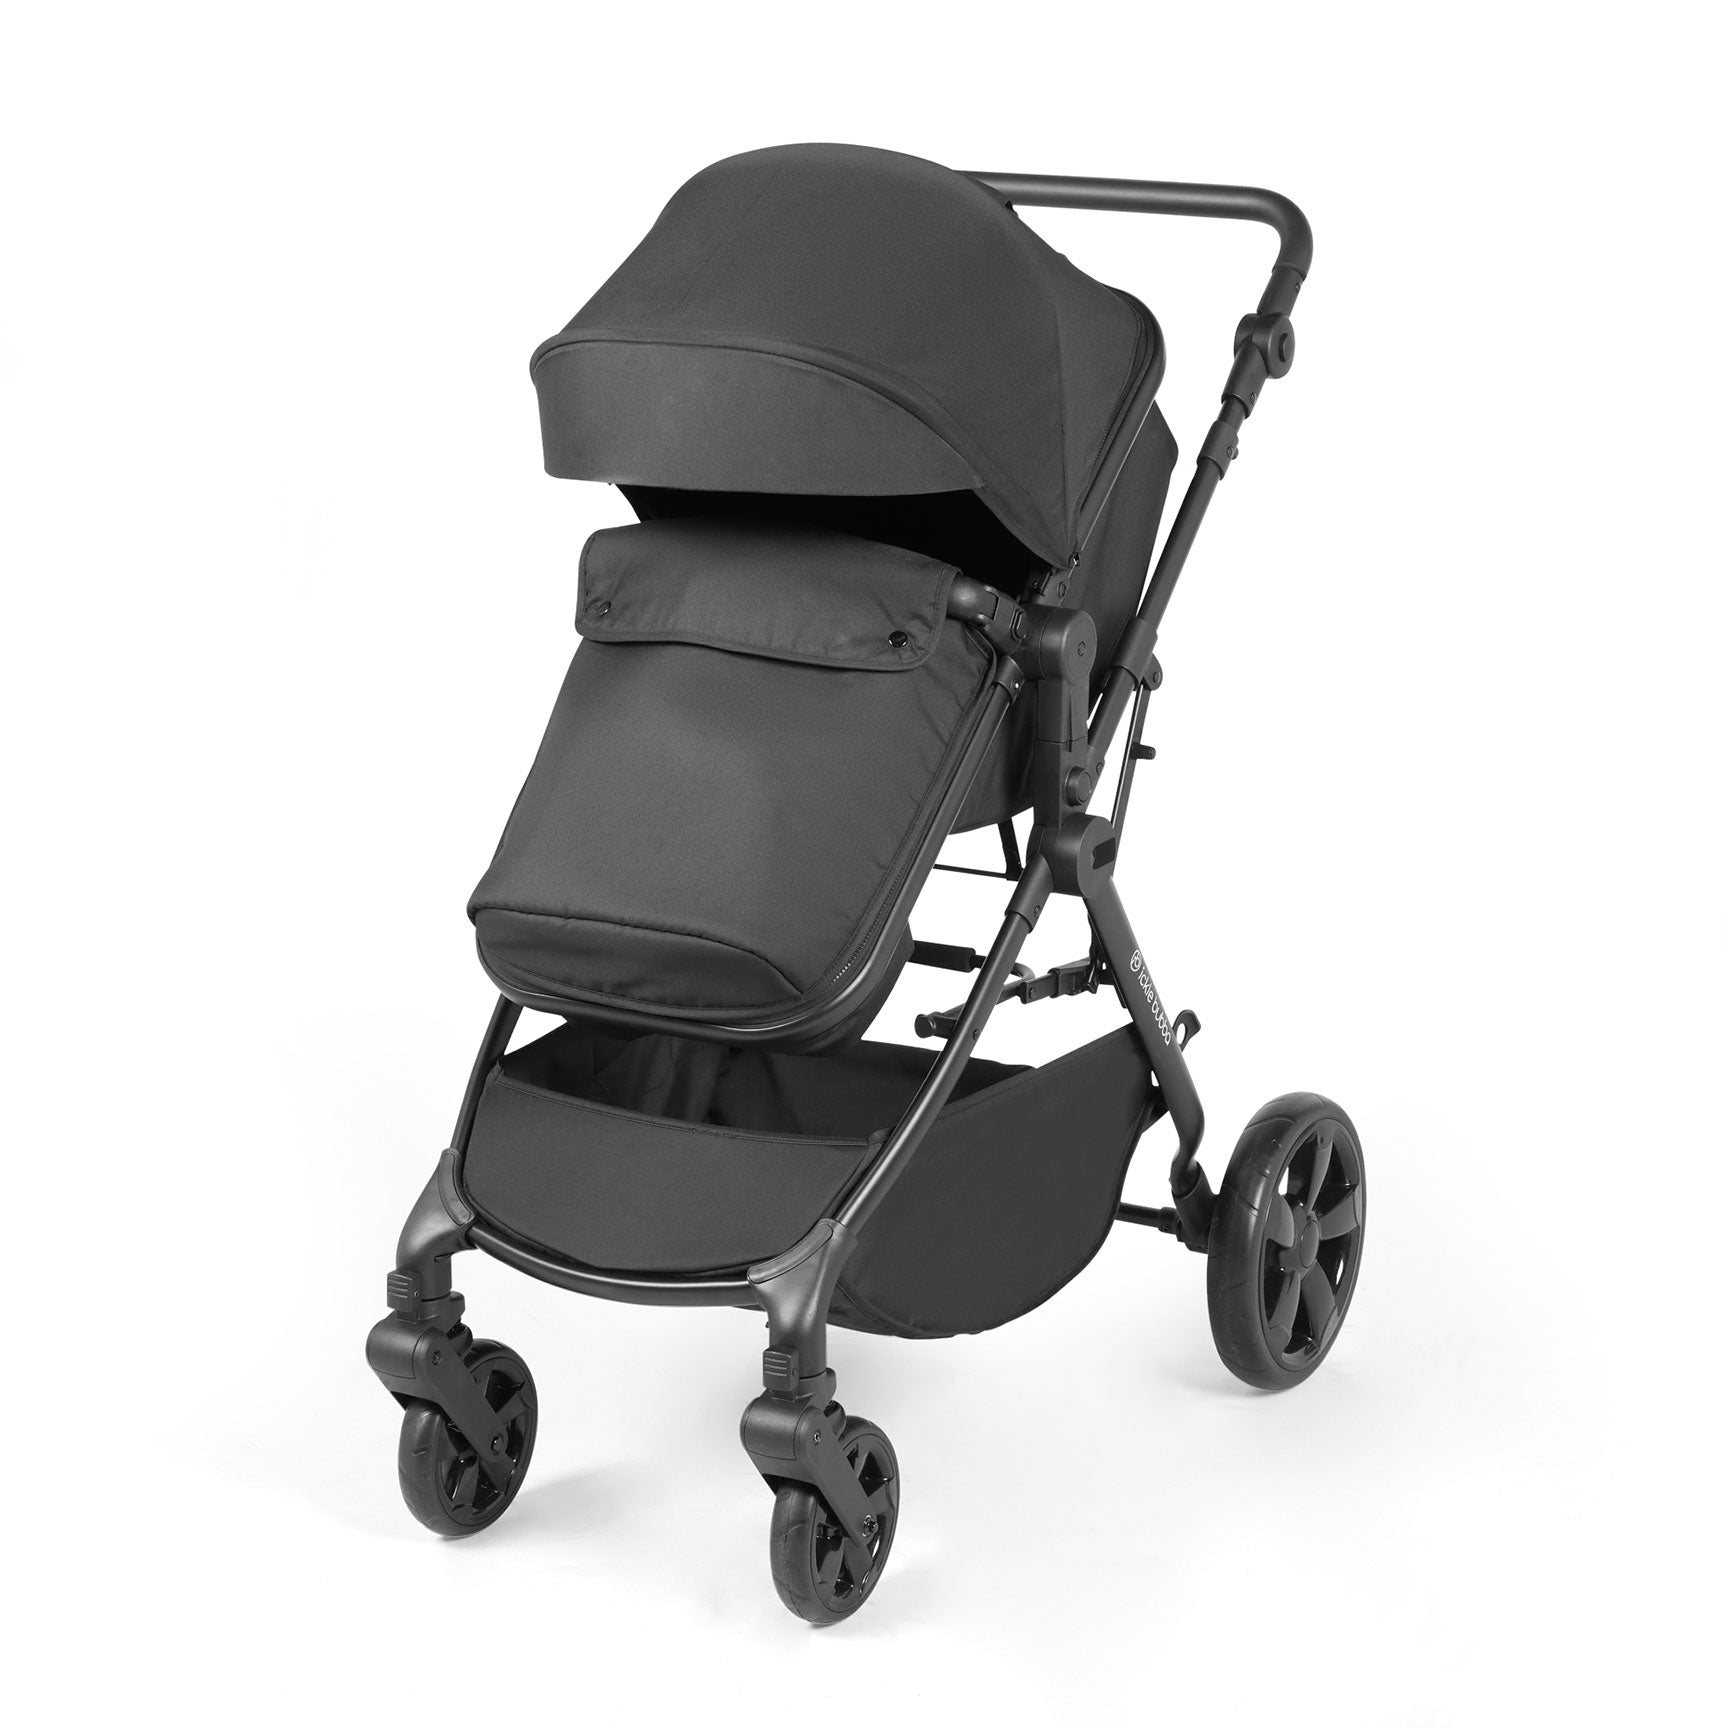 Ickle Bubba baby prams Ickle Bubba Comet 3-in-1 Travel System with Astral Car Seat - Black 10-008-101-002